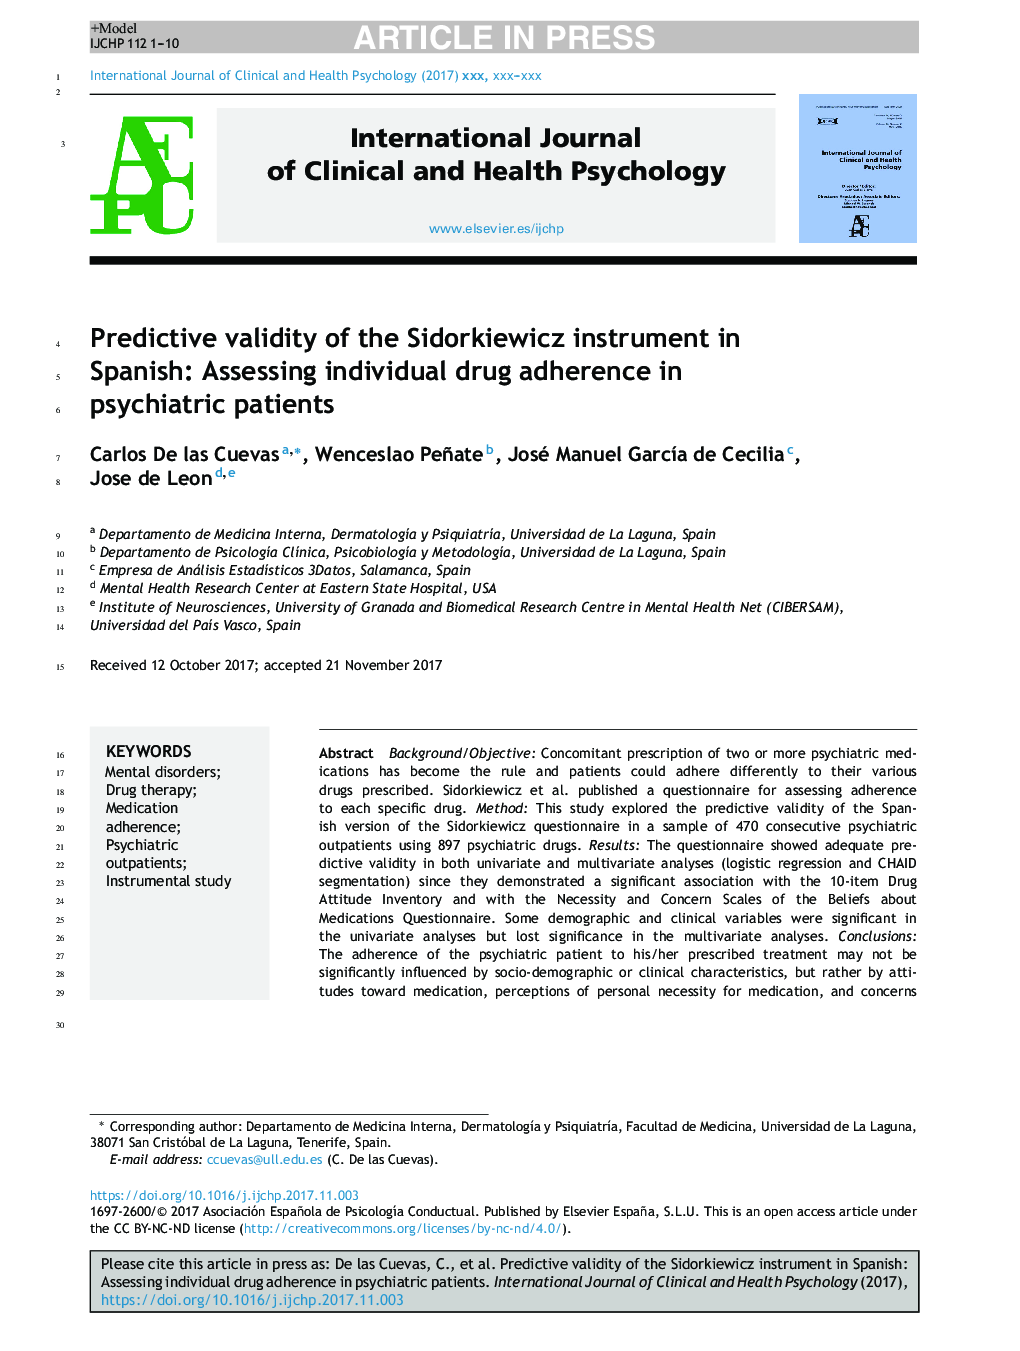 Predictive validity of the Sidorkiewicz instrument in Spanish: Assessing individual drug adherence in psychiatric patients